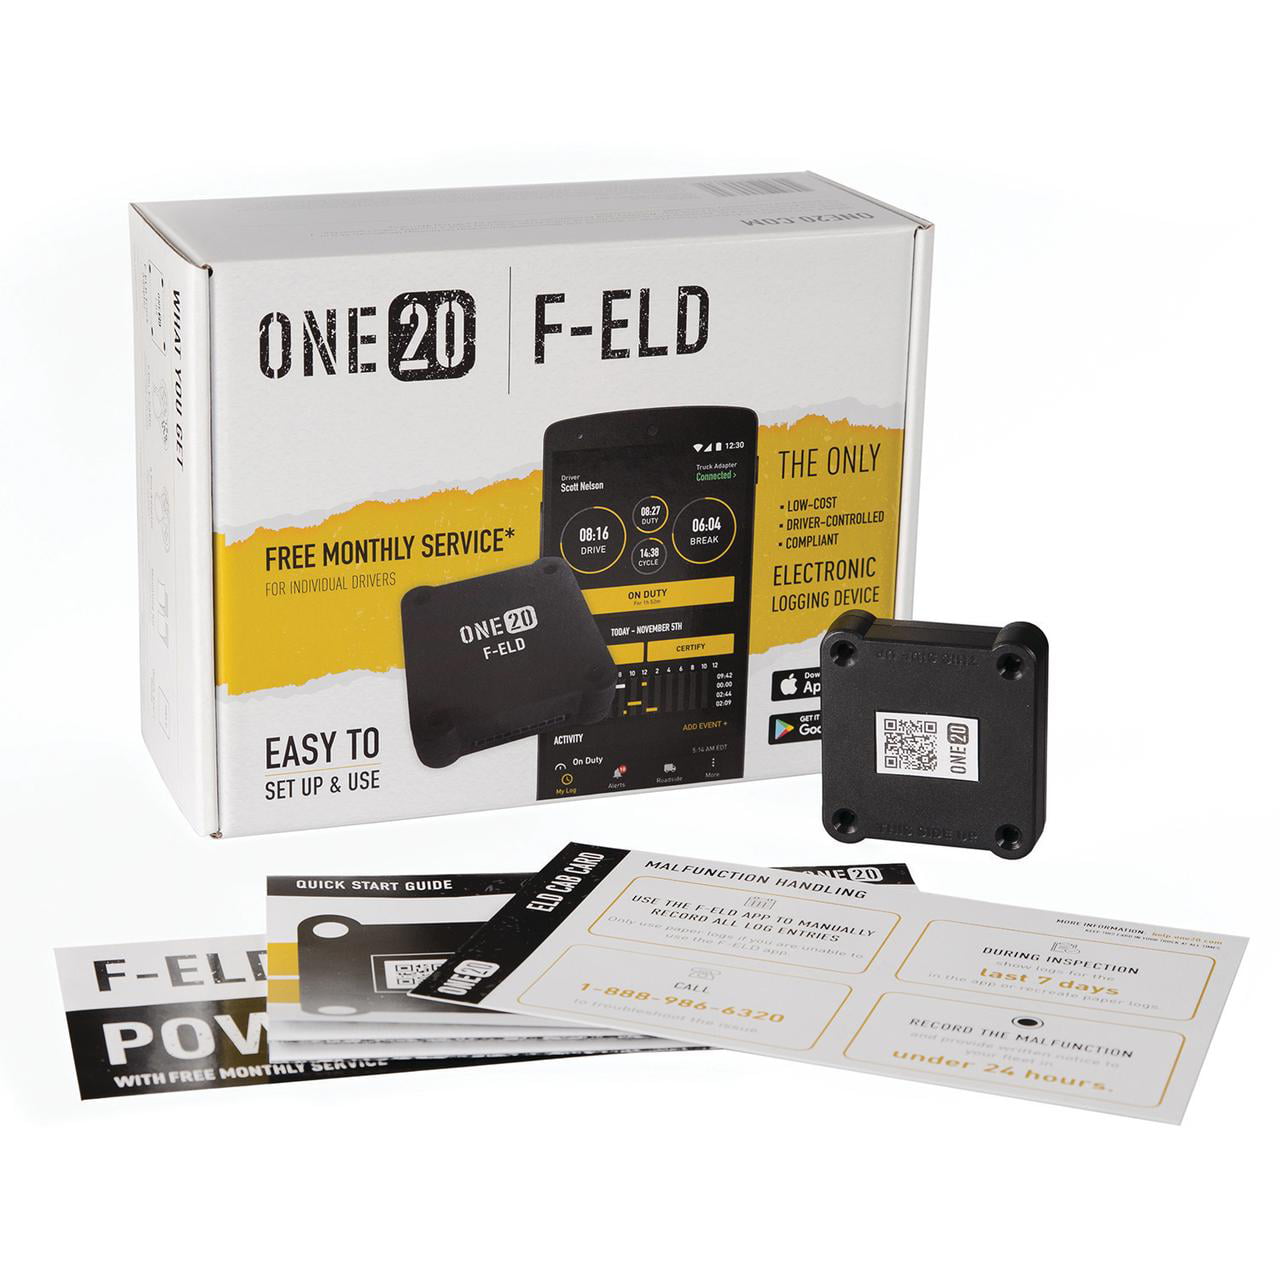 One20 F-ELD ELECTRONIC LOGGING DEVICE  EASY TO SET UP AND USE 